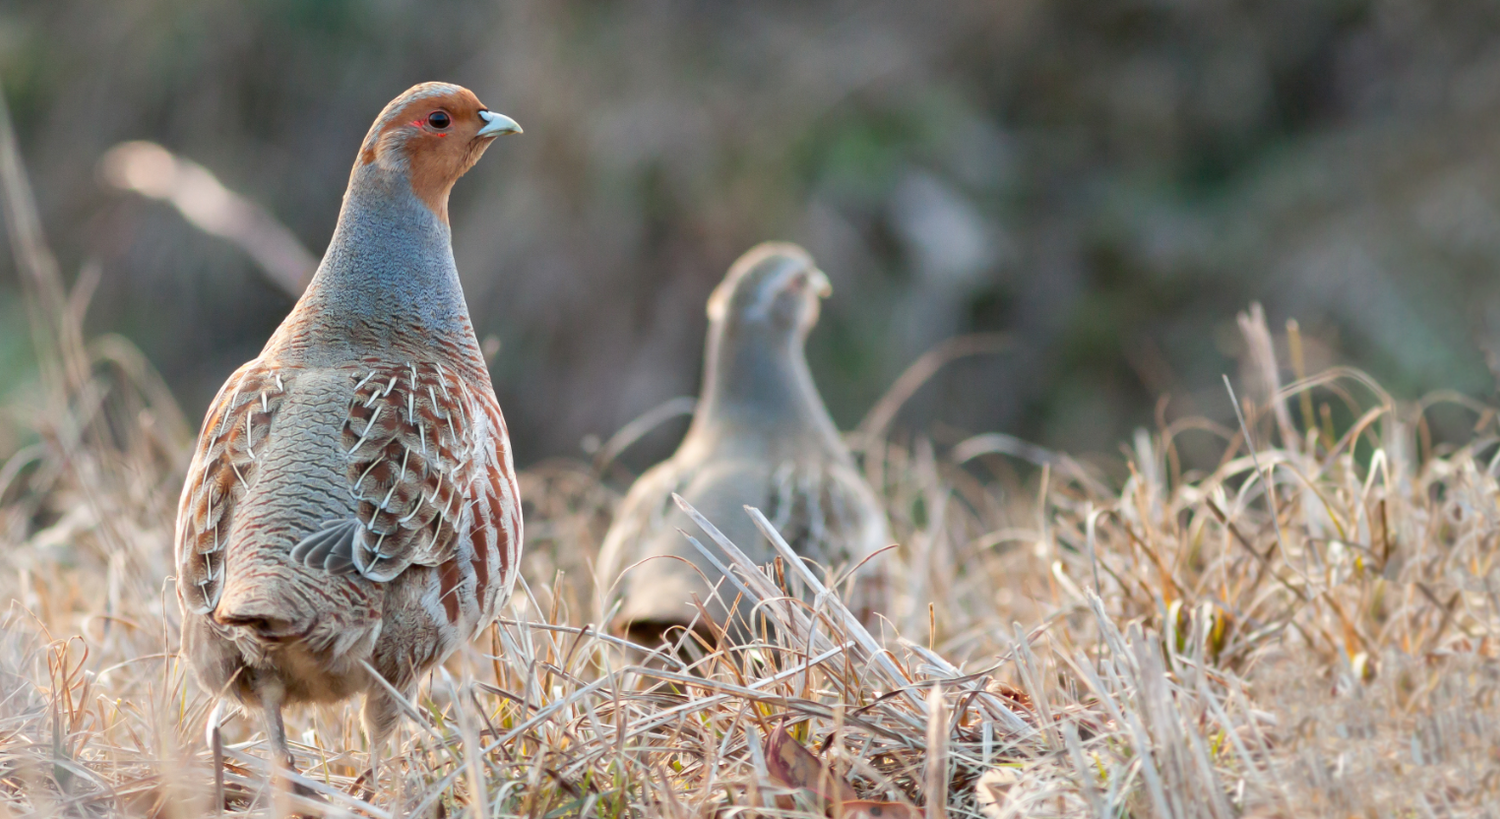 Not surprisingly, Perdix Wildlife Supplies are particularly fond of grey partridges and the landscapes and habitats in which they live.